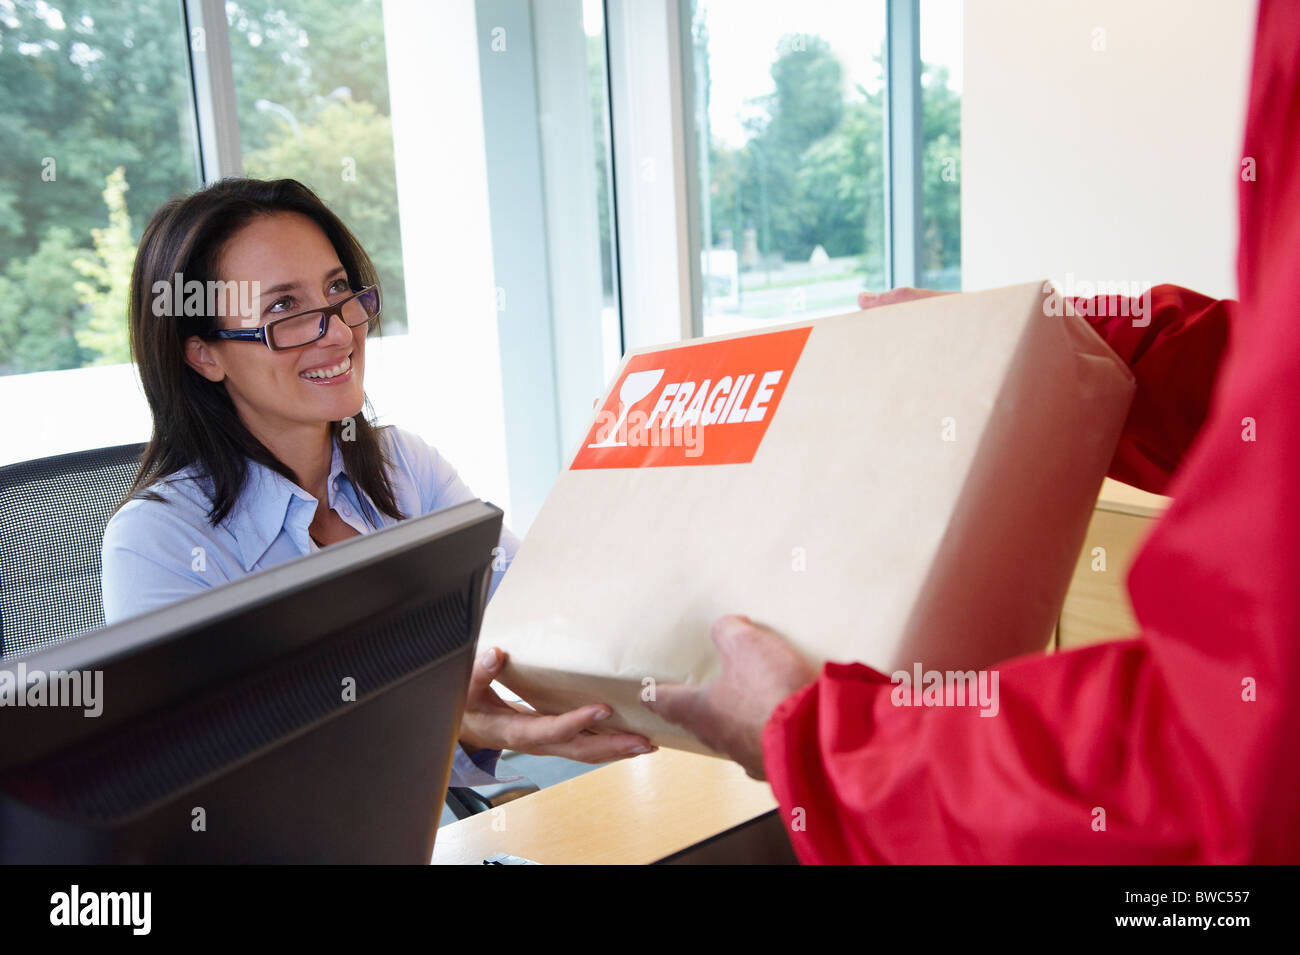 Businesswoman receiving a package Stock Photo